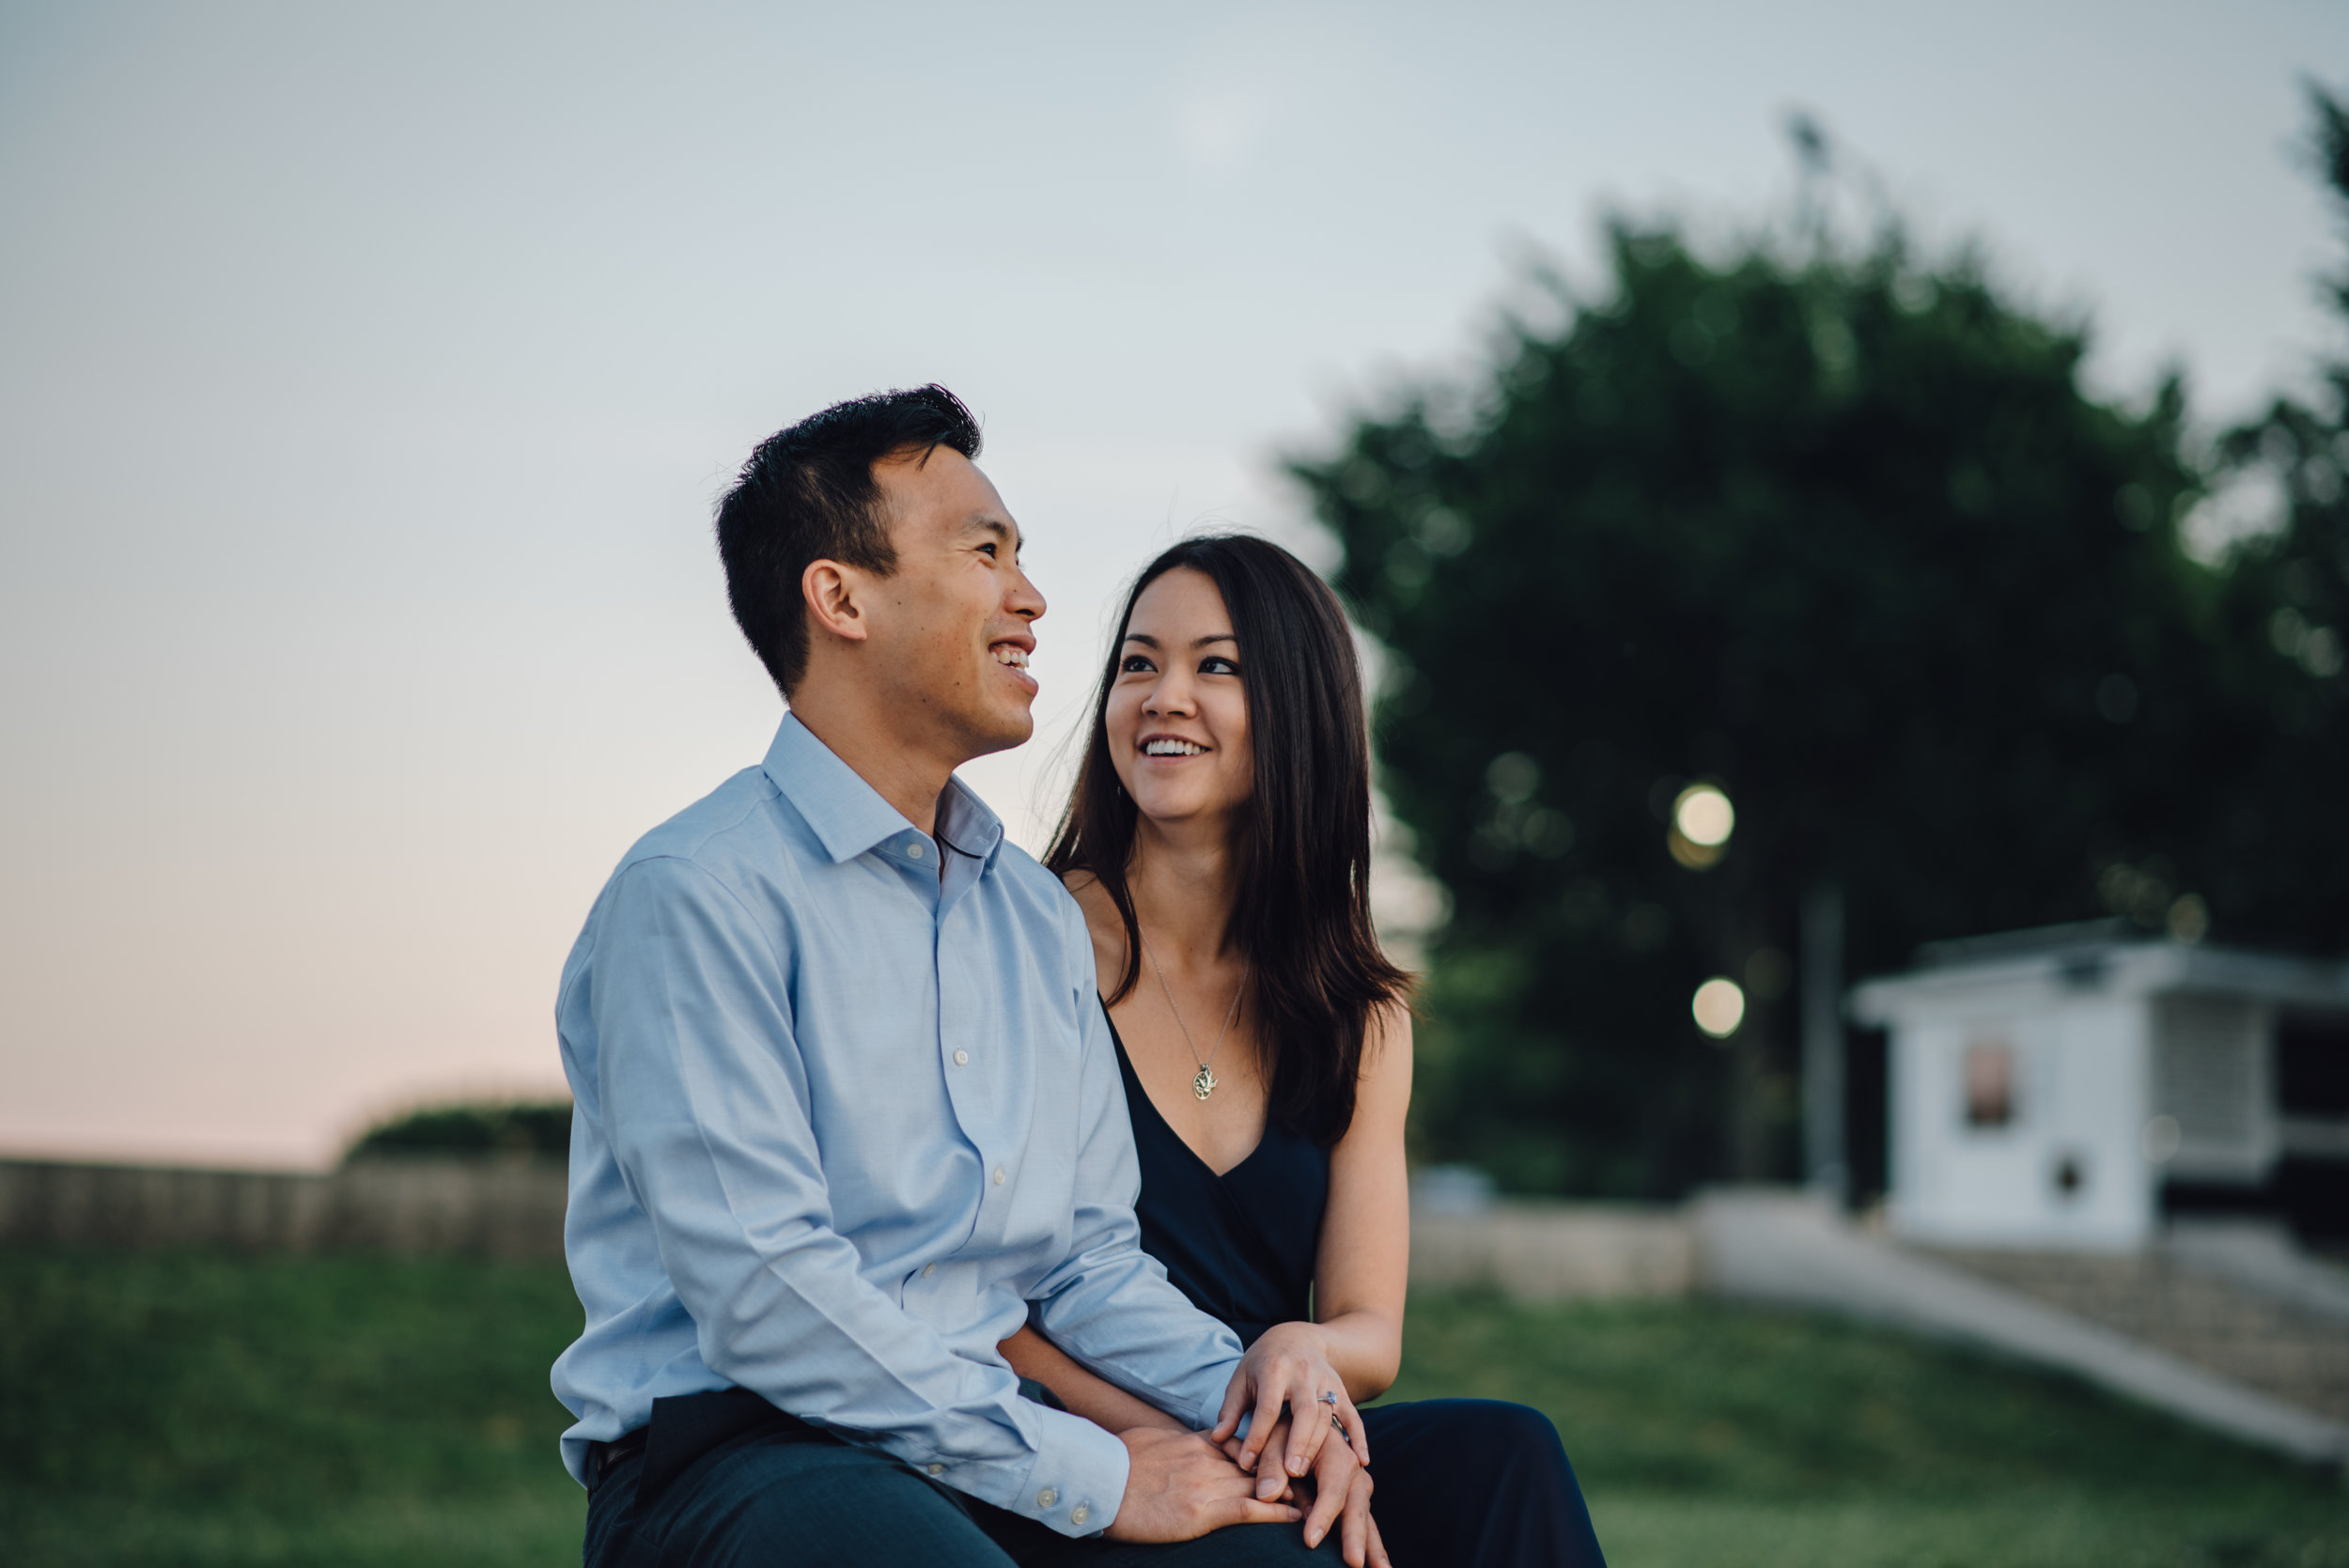 Main and Simple Photography_2016_Engagement_DC_T+E-296.jpg